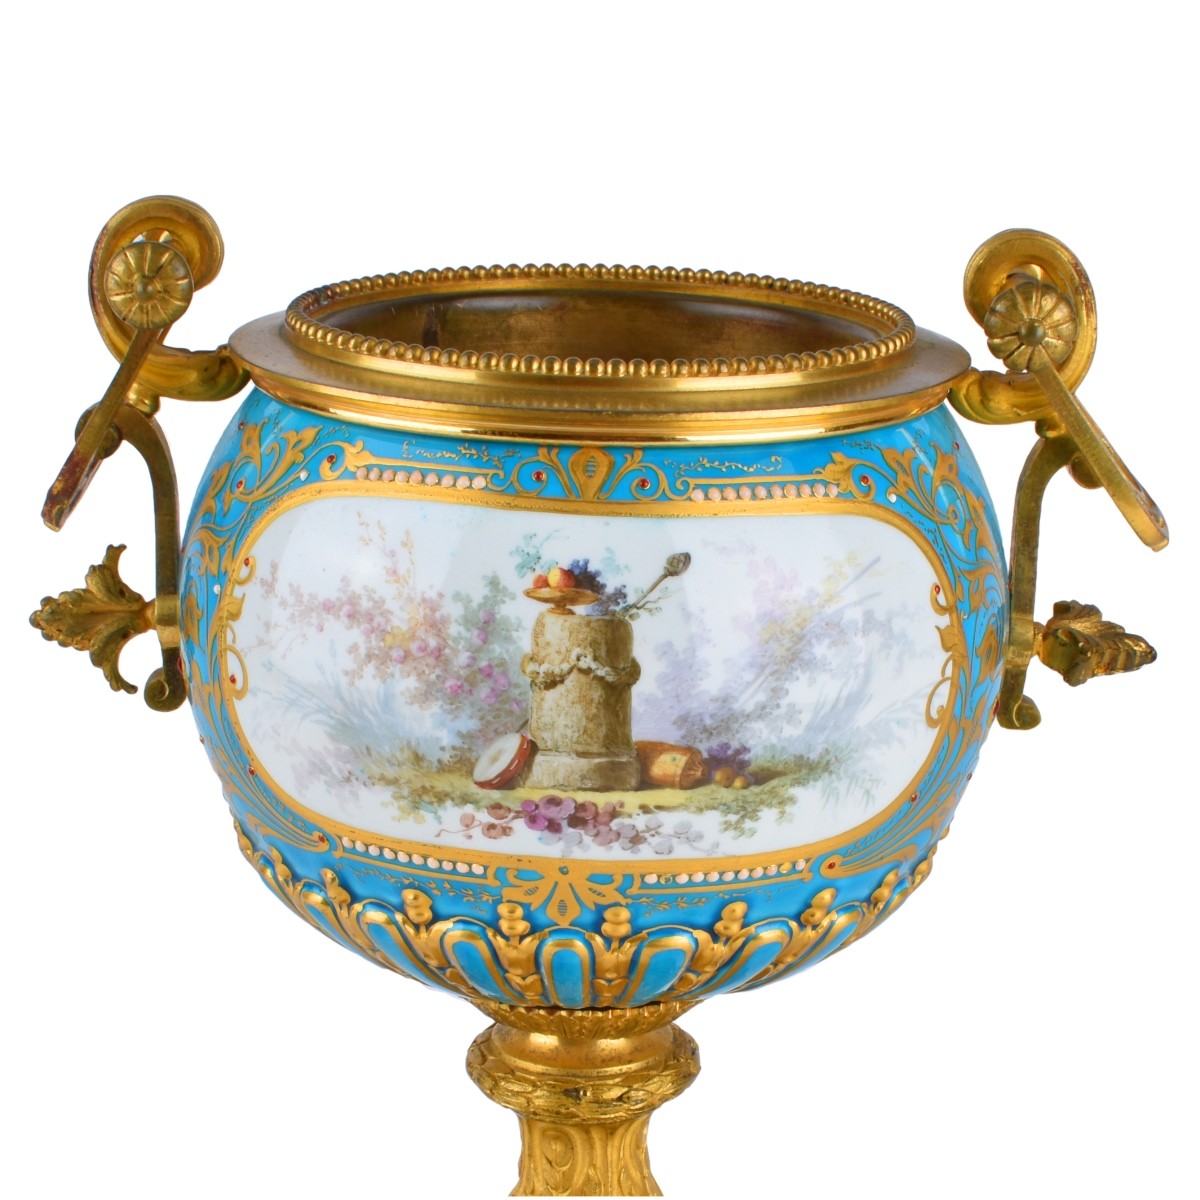 A Sevres style Porcelain and Bronze Mounted Bowl